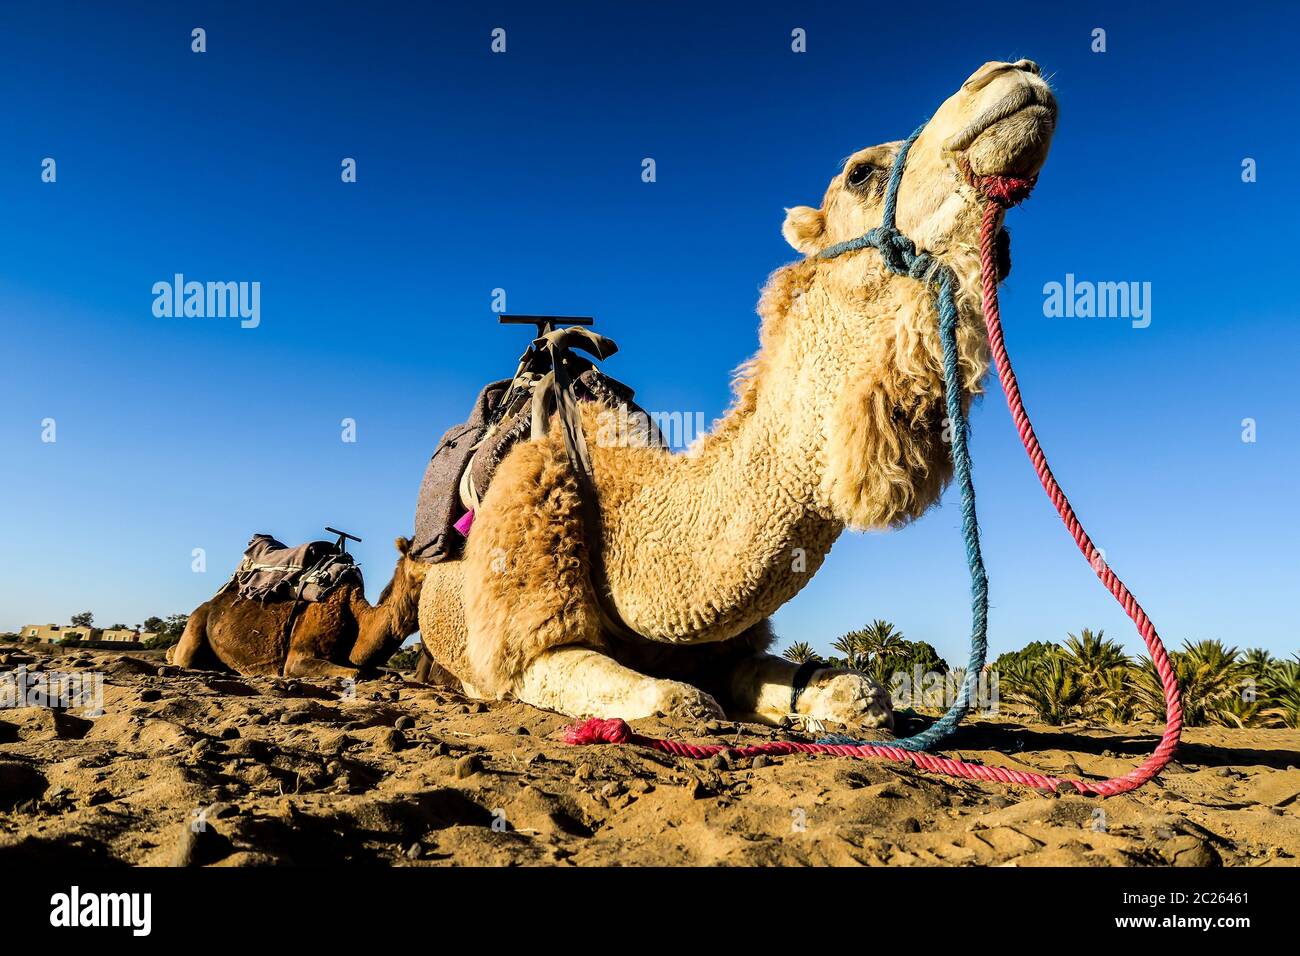 camel in the desert, photo as background Stock Photo